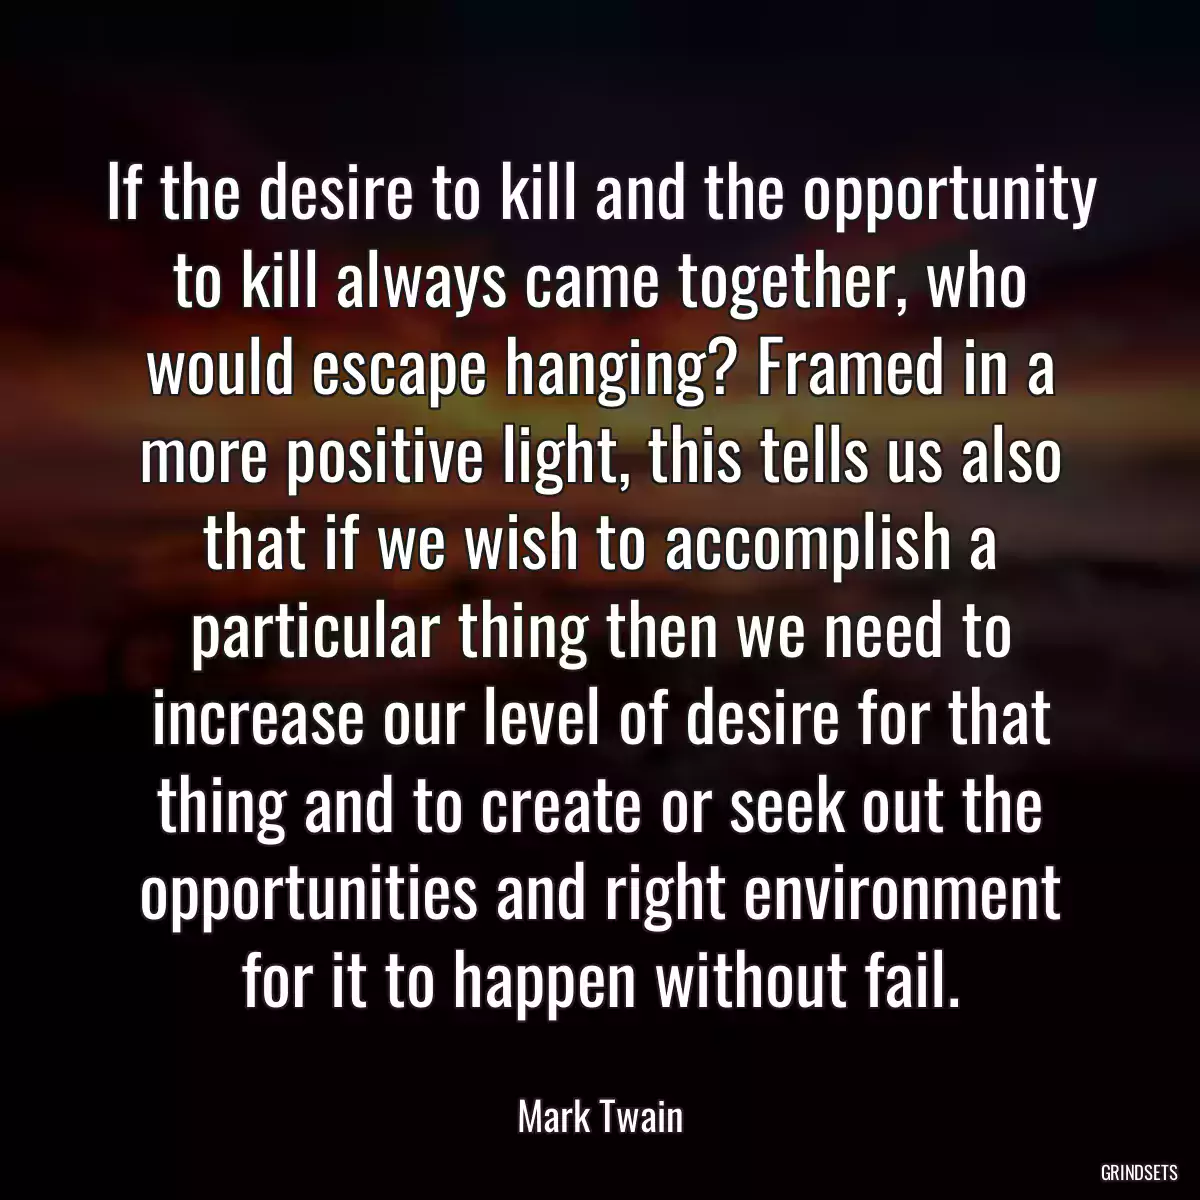 If the desire to kill and the opportunity to kill always came together, who would escape hanging? Framed in a more positive light, this tells us also that if we wish to accomplish a particular thing then we need to increase our level of desire for that thing and to create or seek out the opportunities and right environment for it to happen without fail.